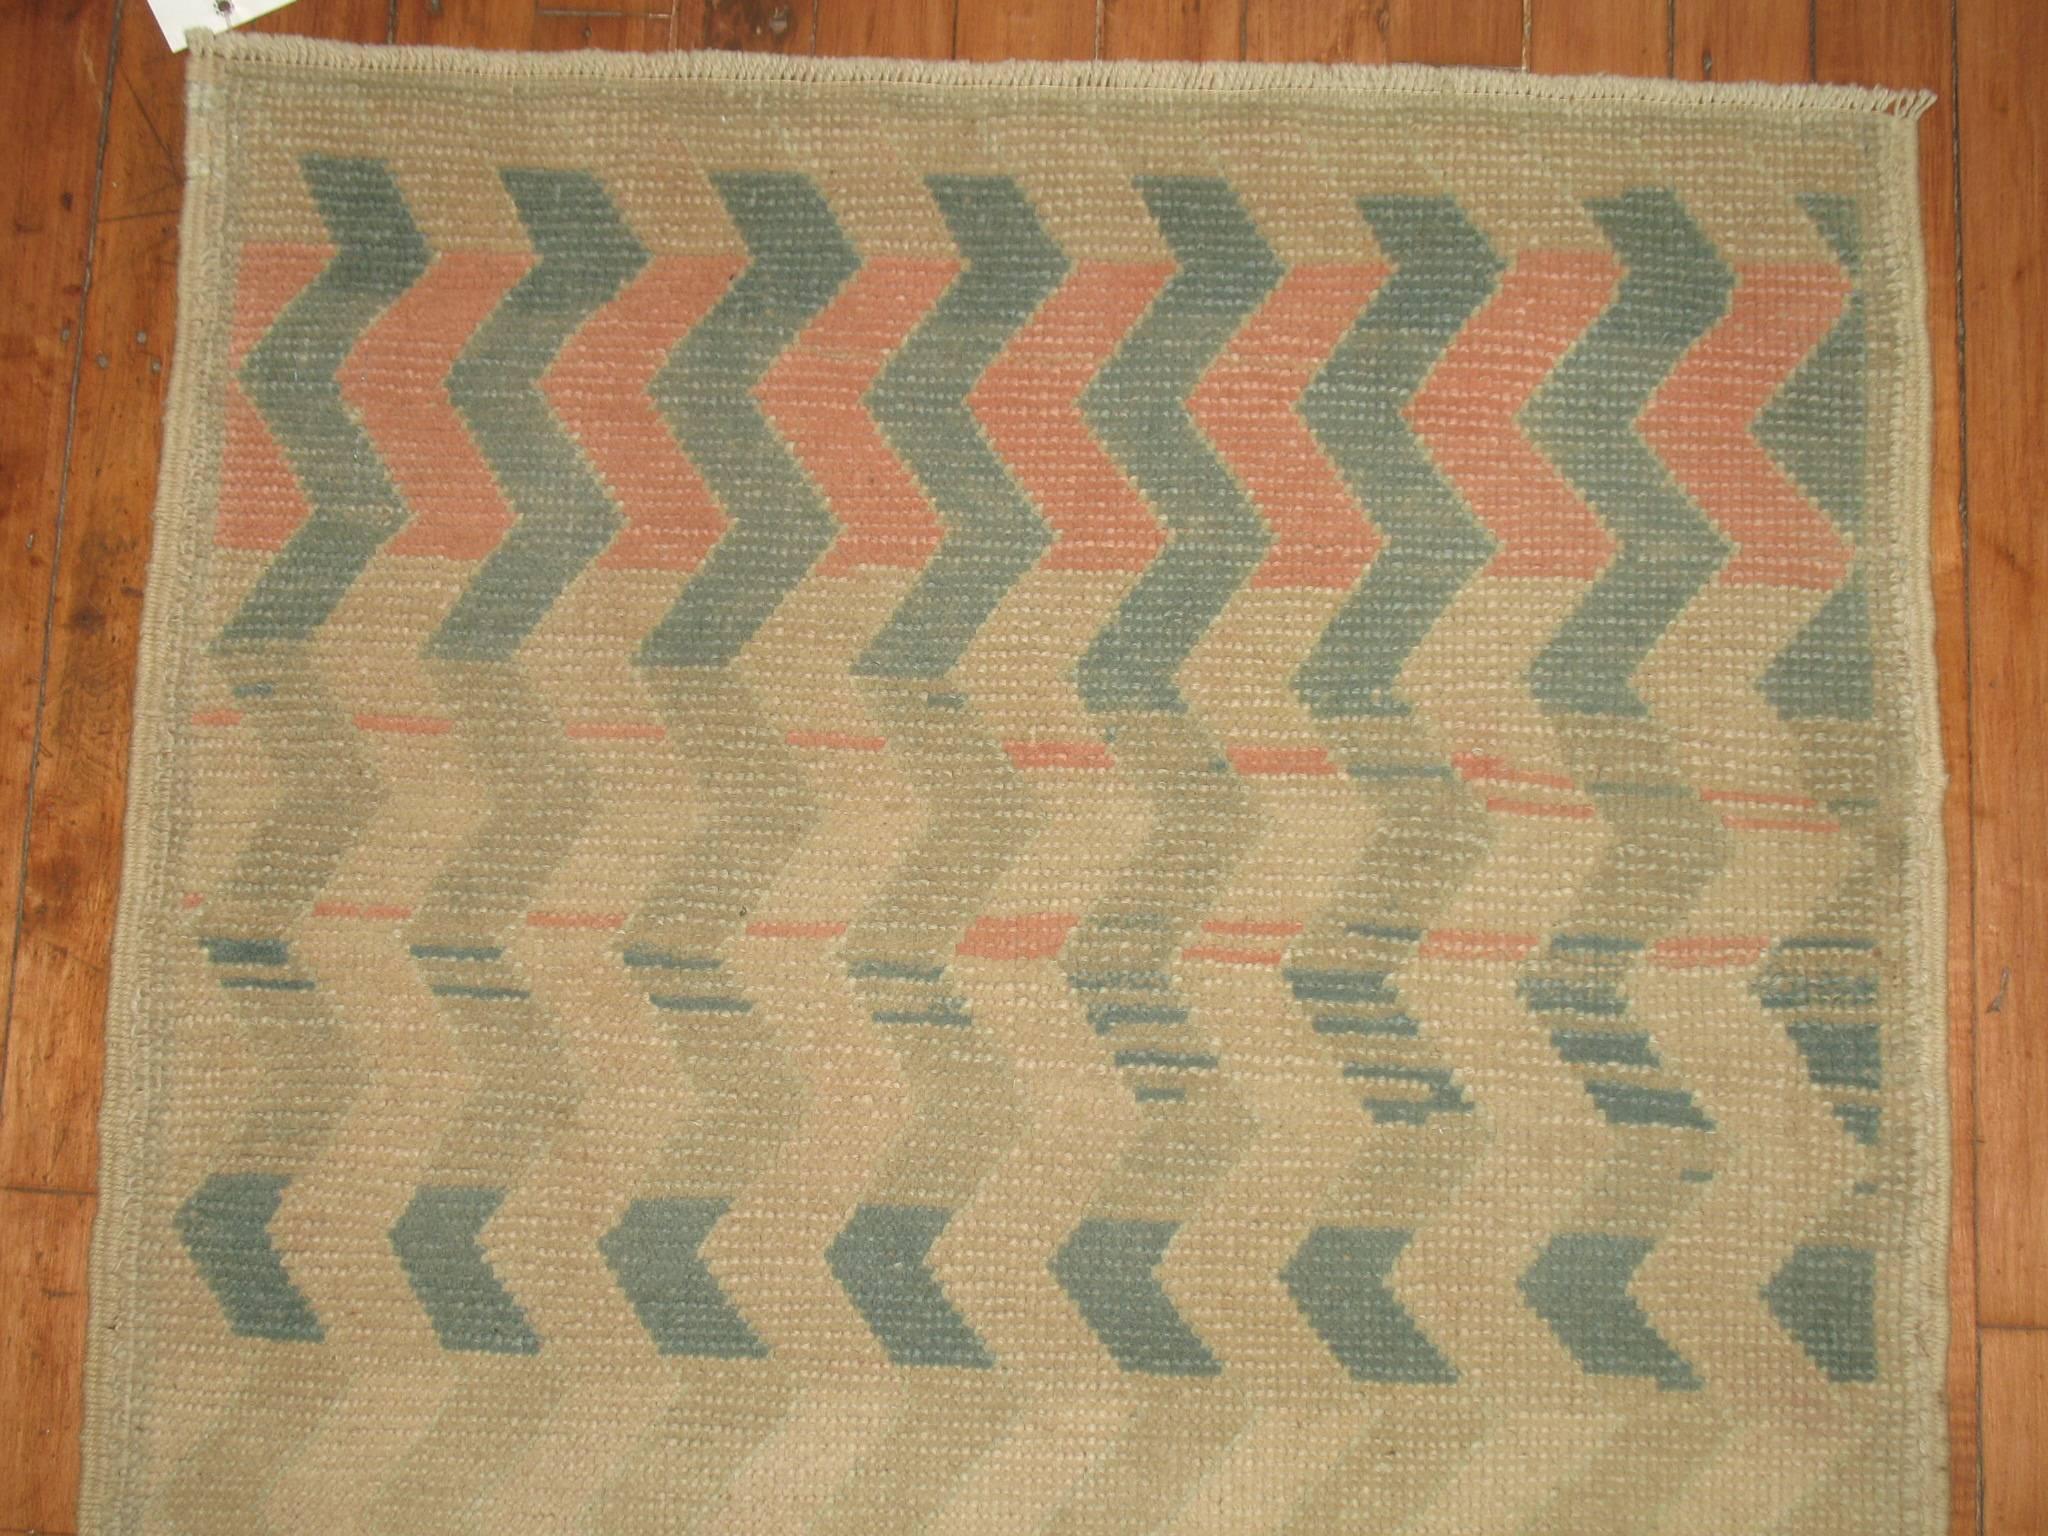 Vintage Turkish deco rug with a funky zig zag pattern.

Measures: 2'2” x 4'3”.